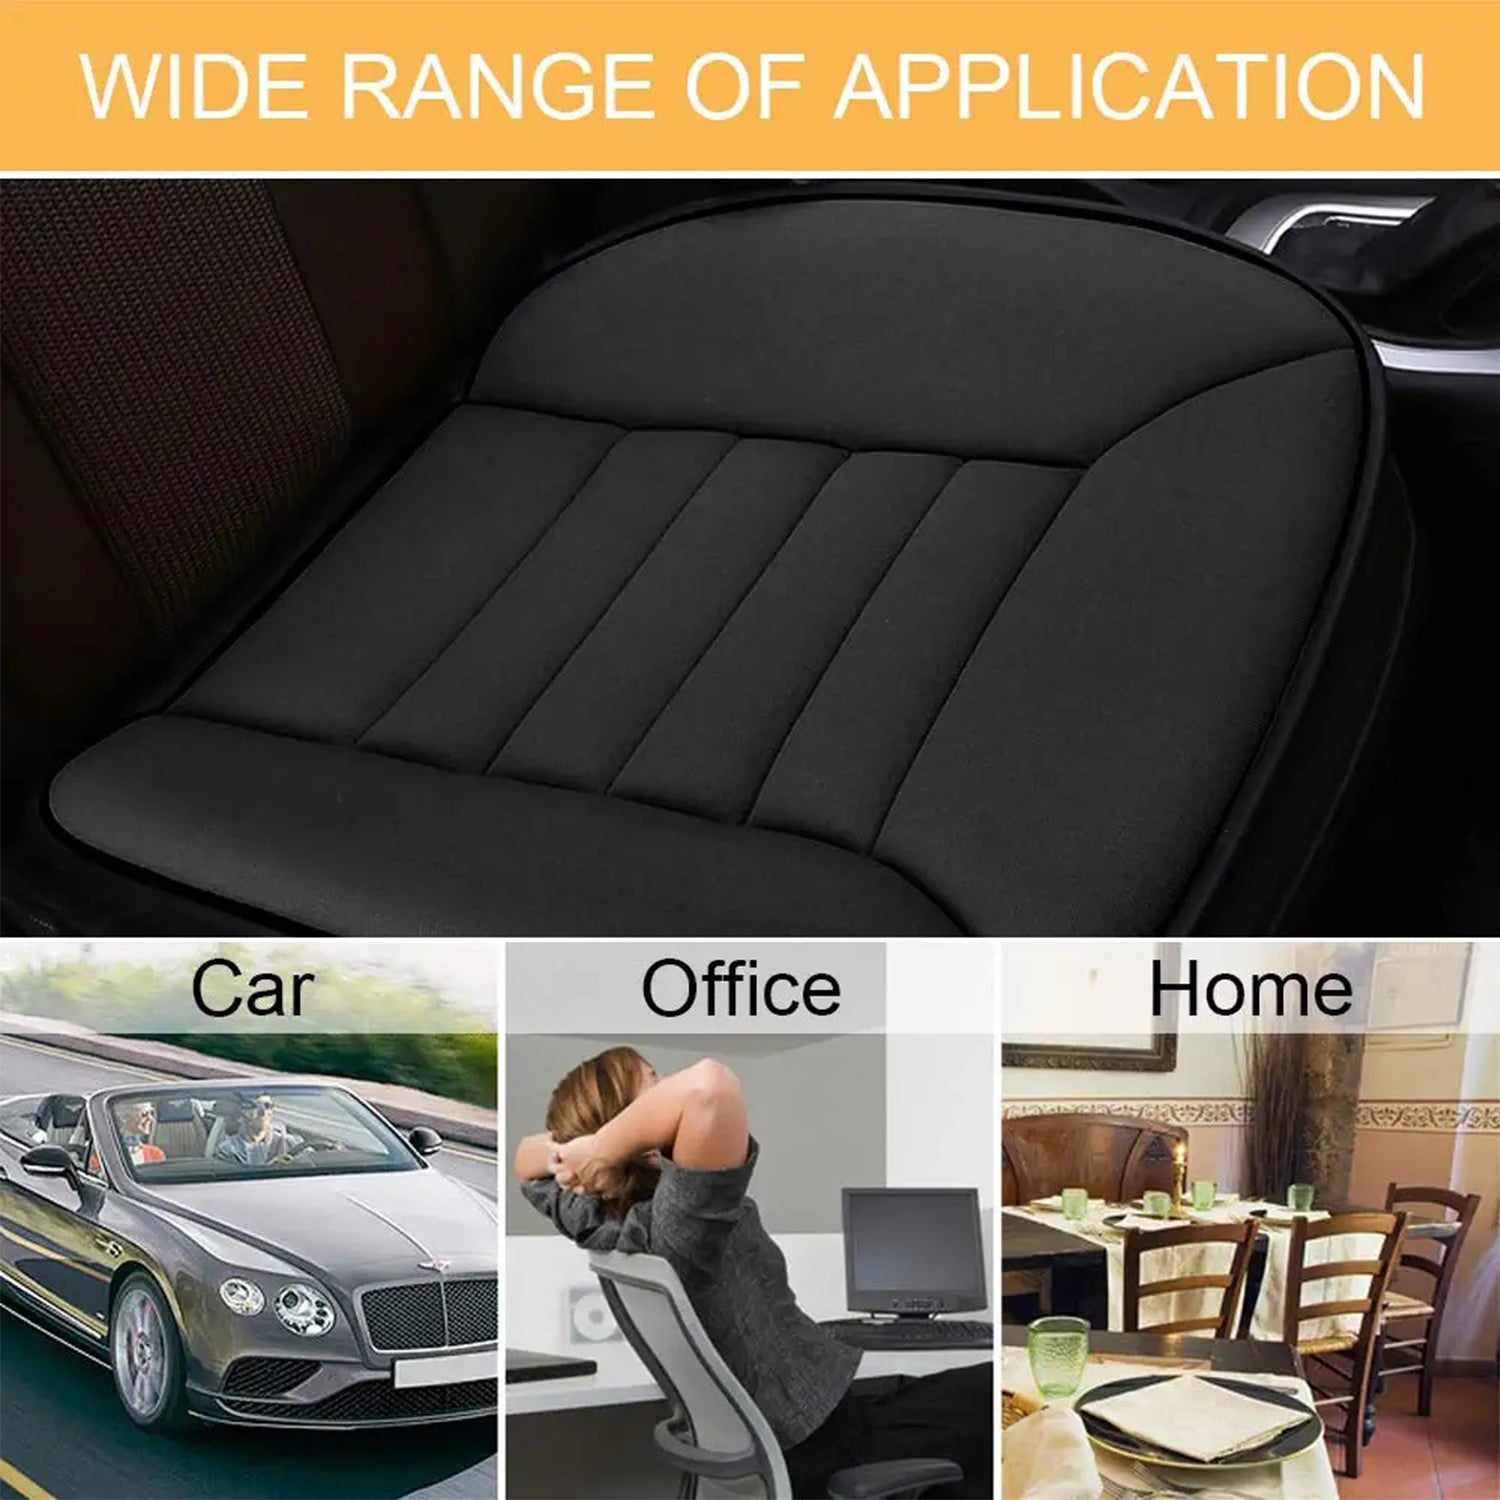 Car Seat Cushion with 1.2inch Comfort Memory Foam, Custom-Fit For Car, Seat Cushion for Car and Office Chair DLLE247